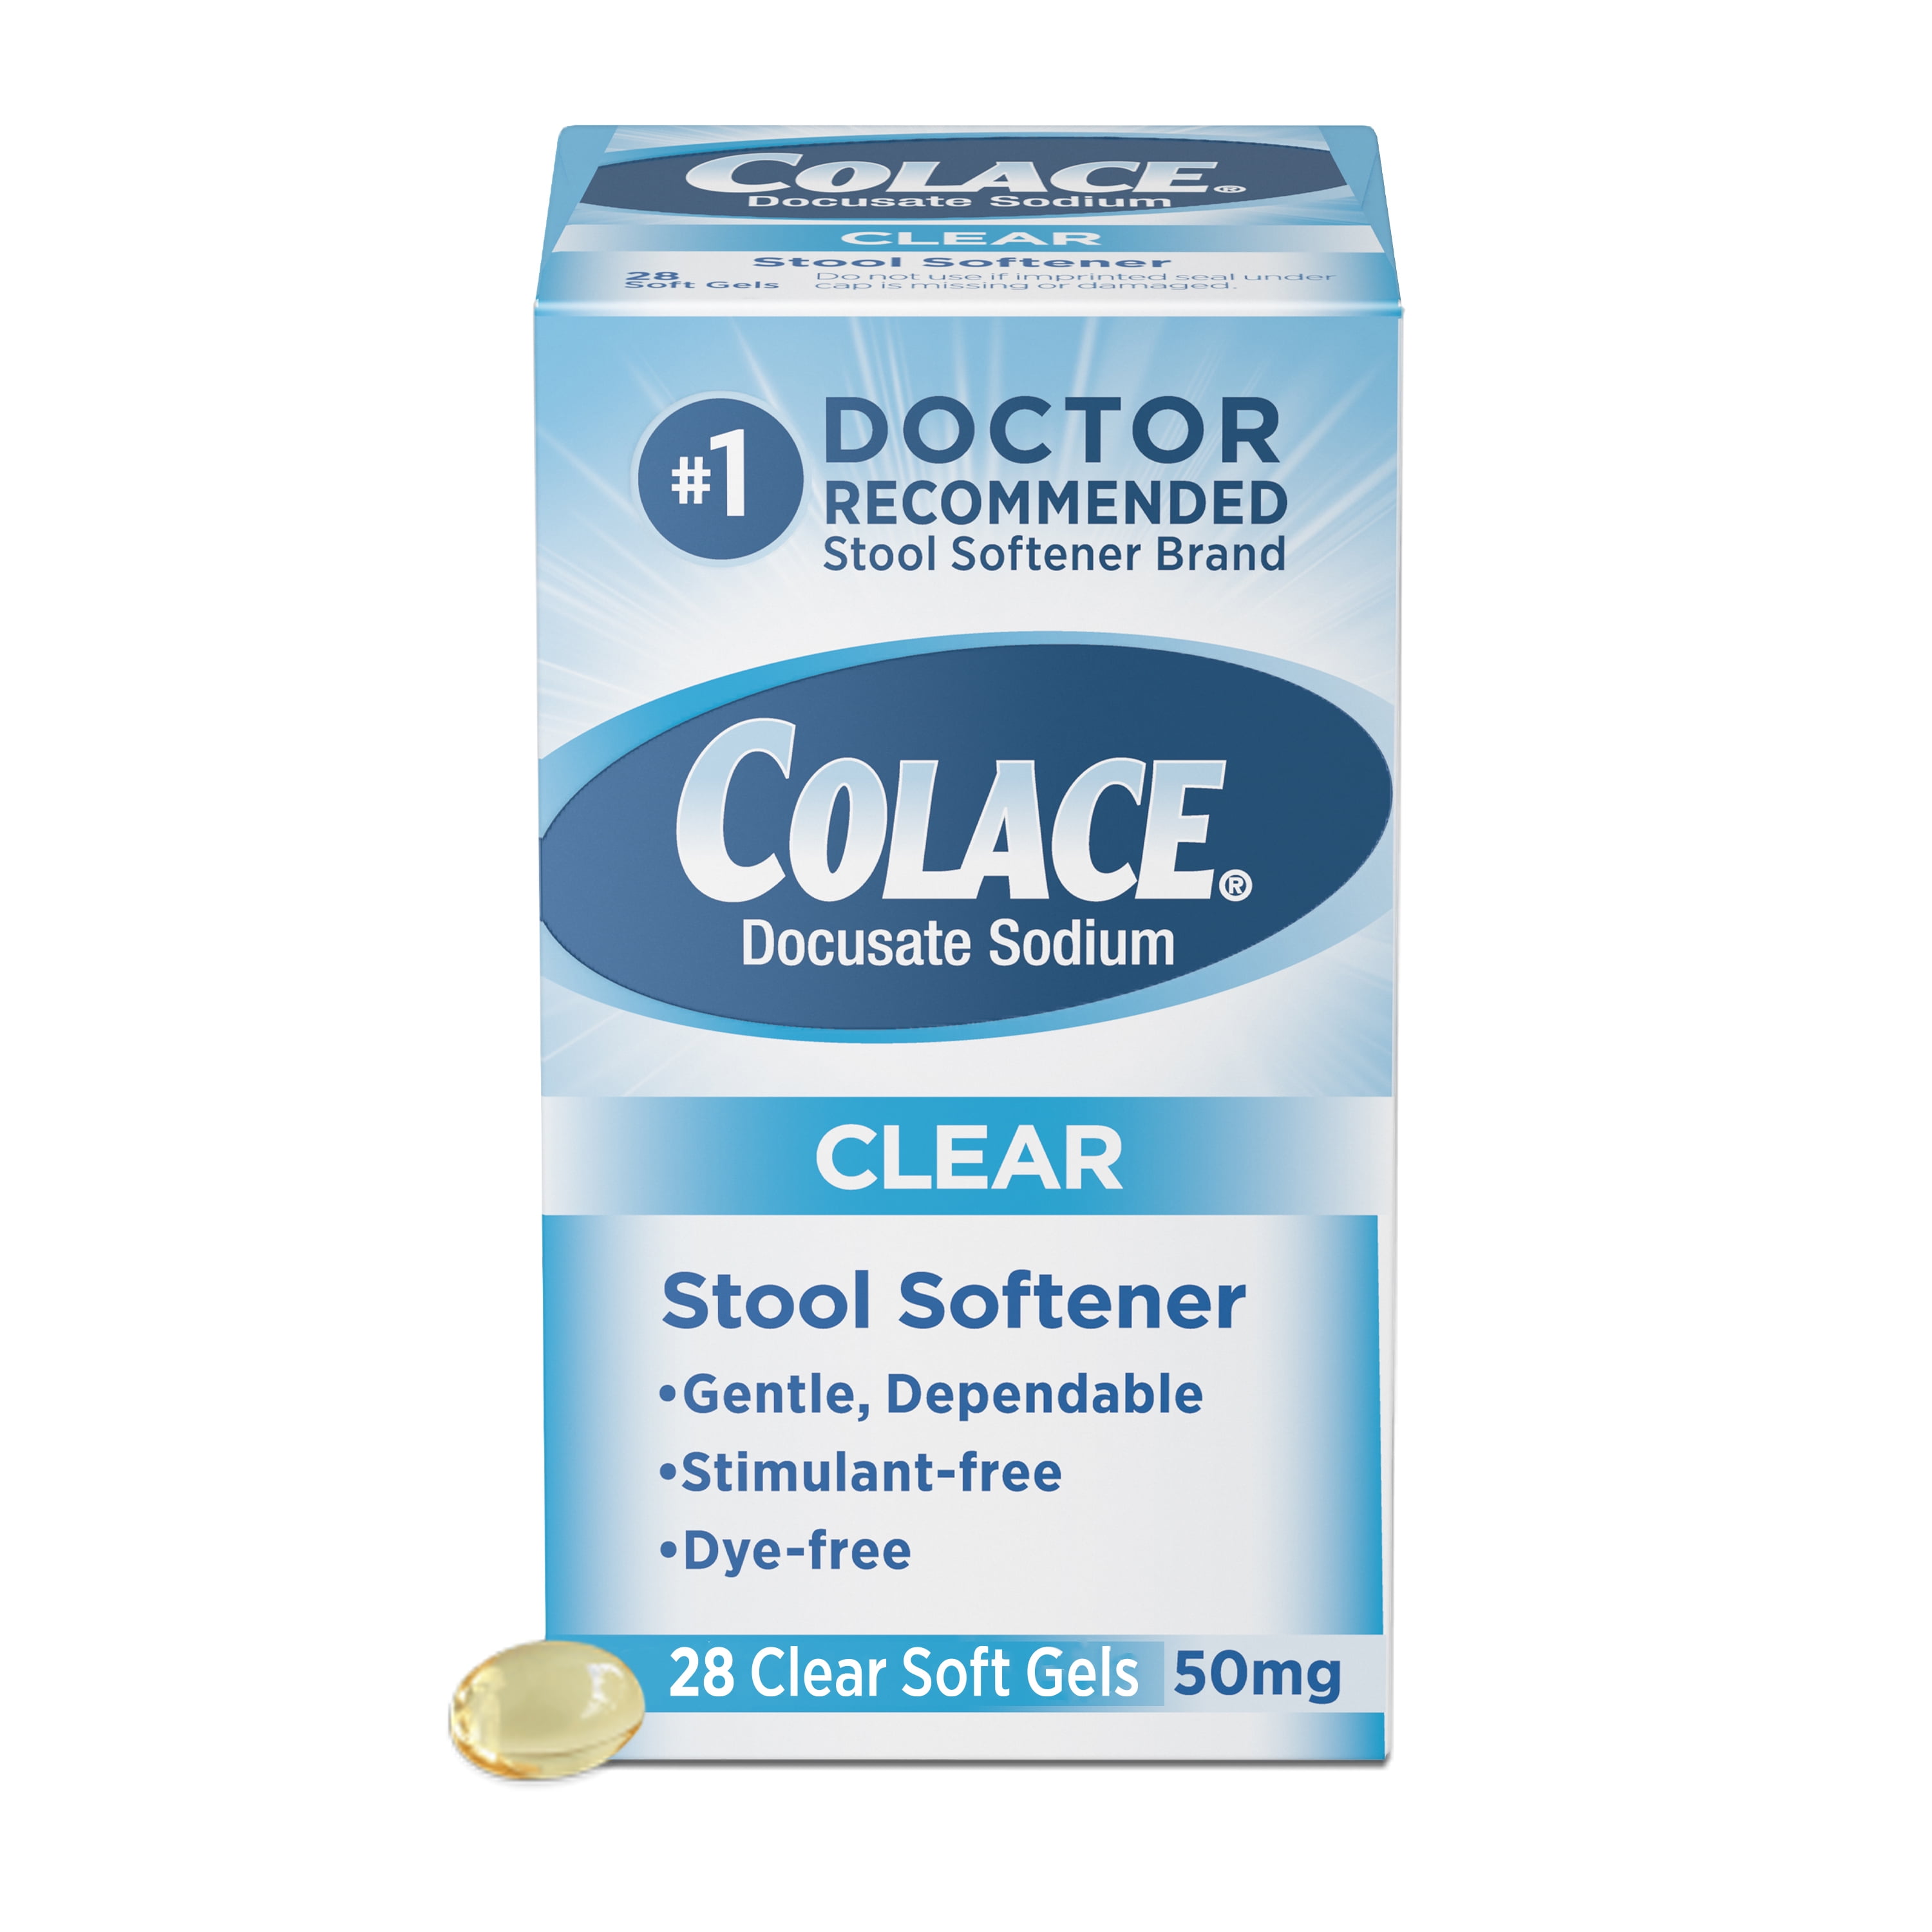 Colace Girl Xxx Porn Videos - Colace Clear Stool Softener Soft Gels, 28 Ct - Walmart.com